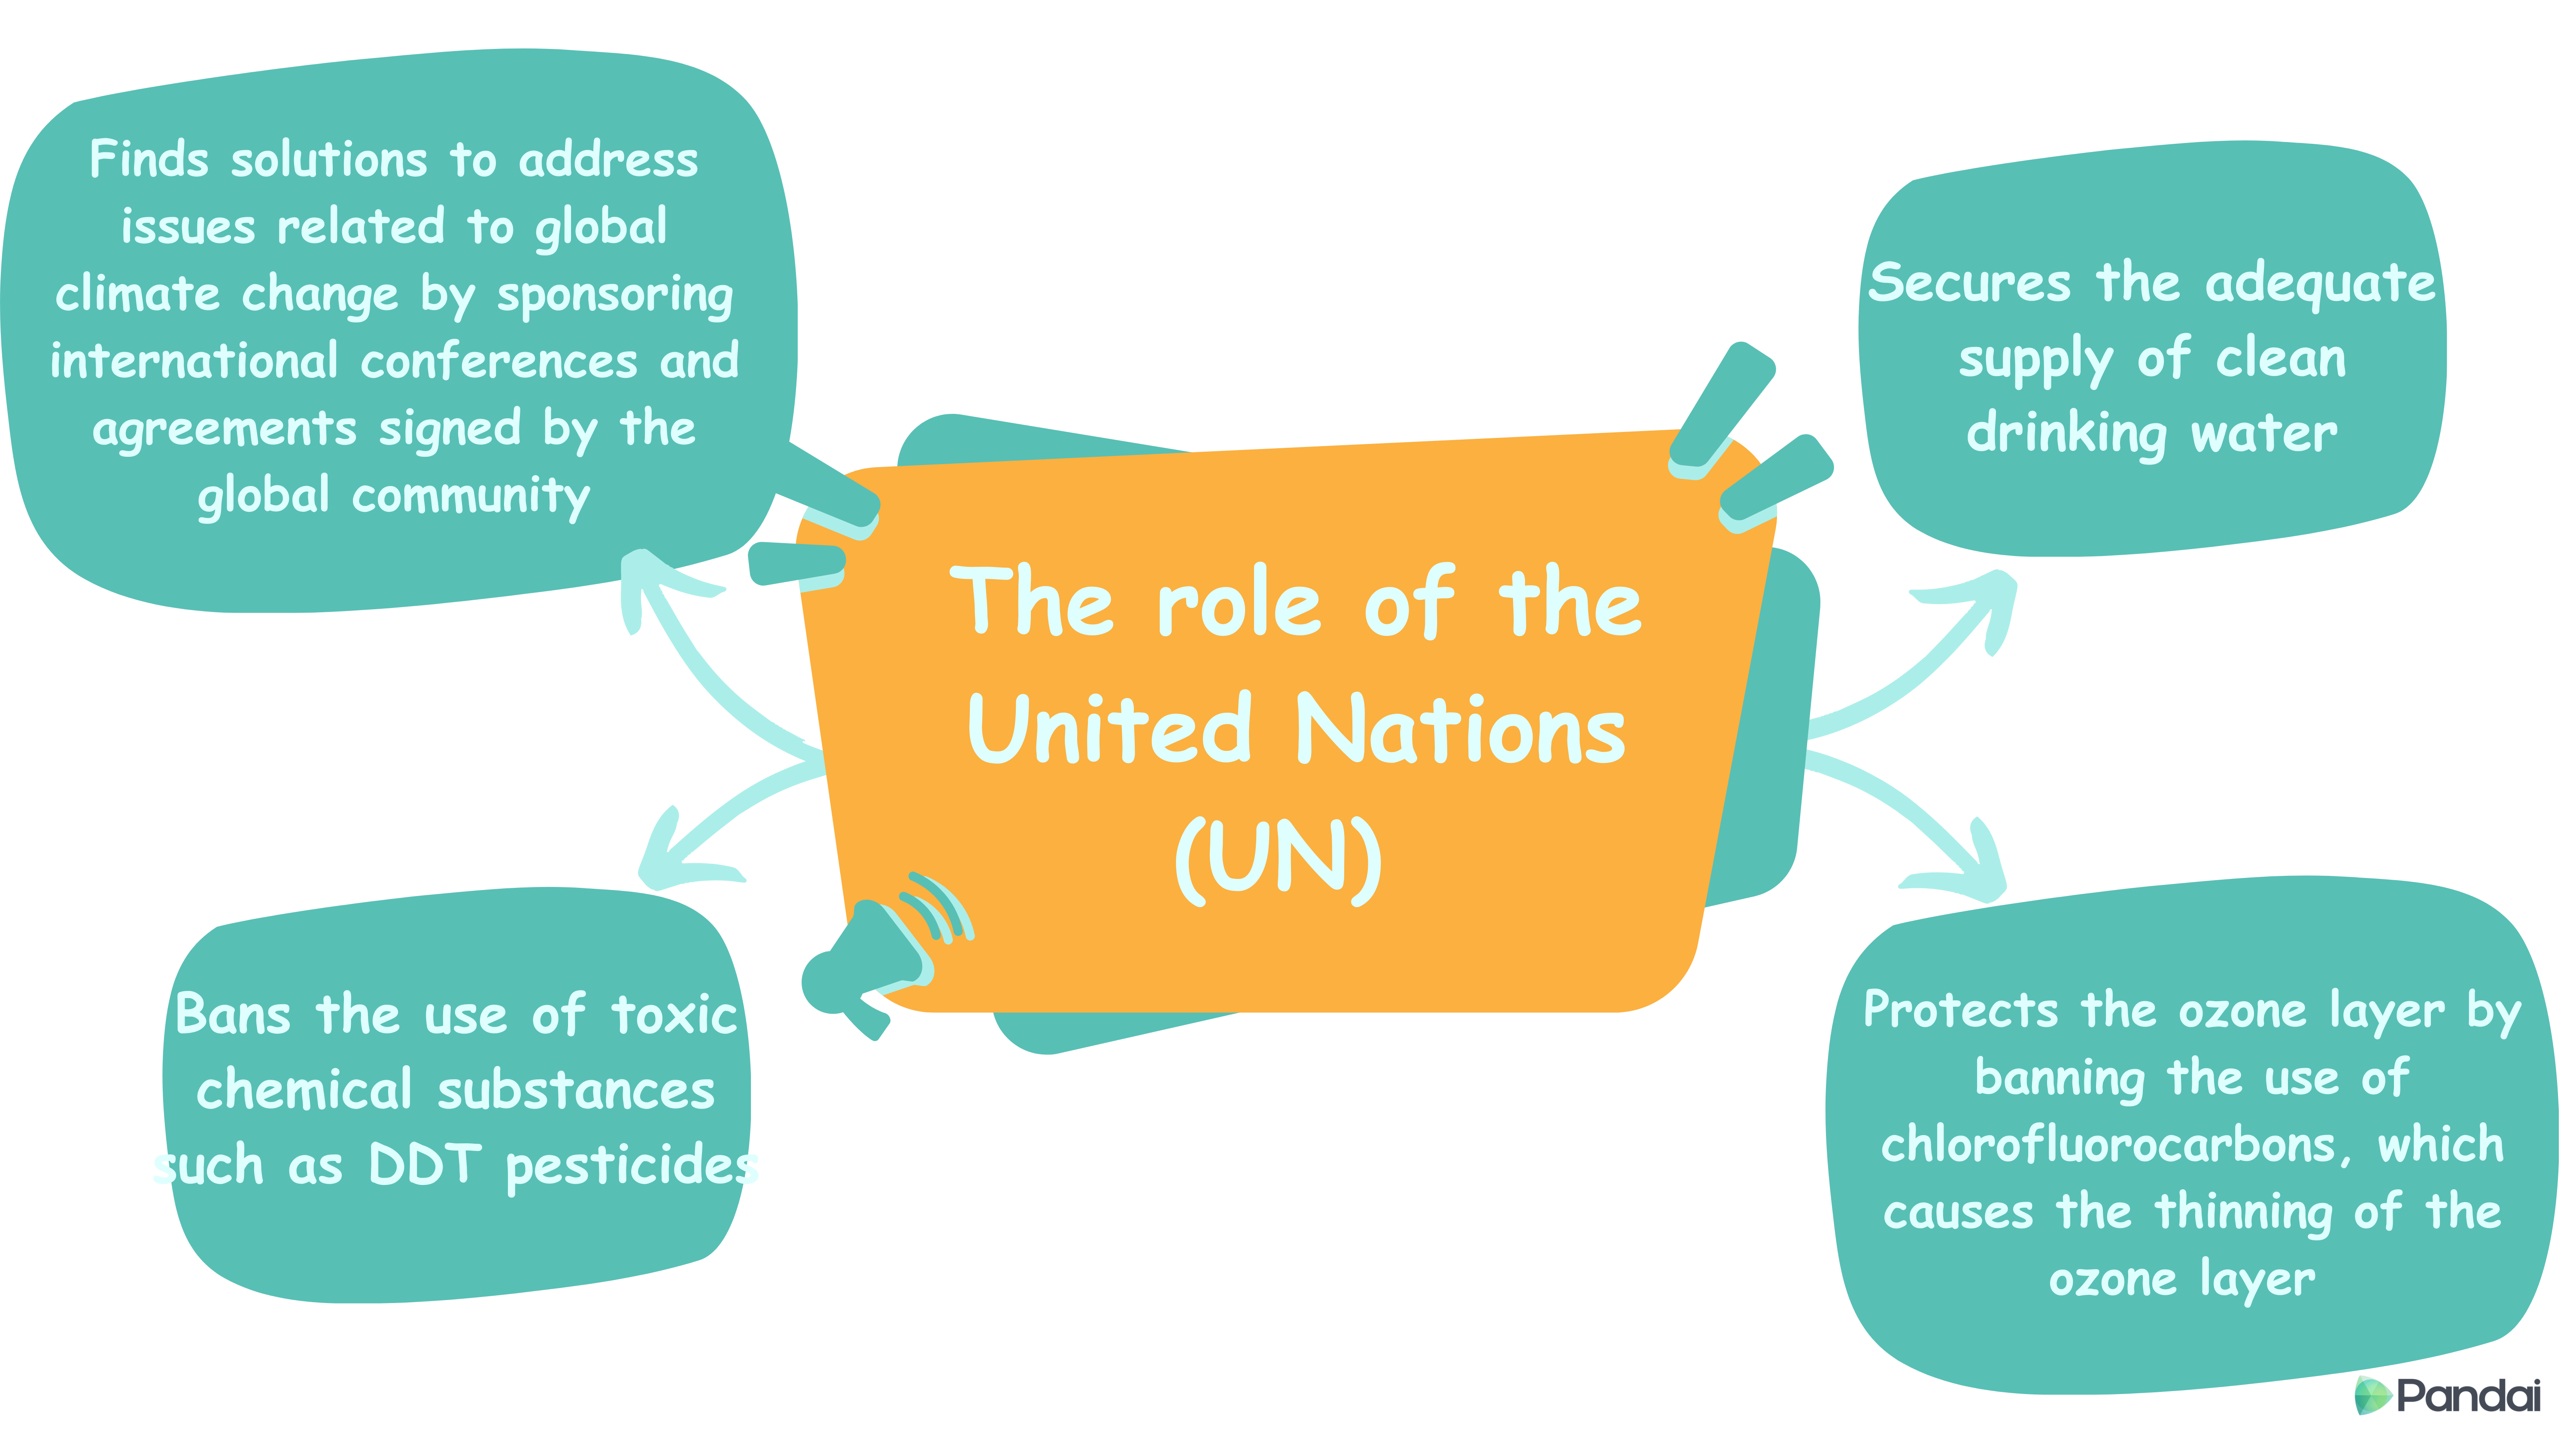 The role of the United Nations (UN)